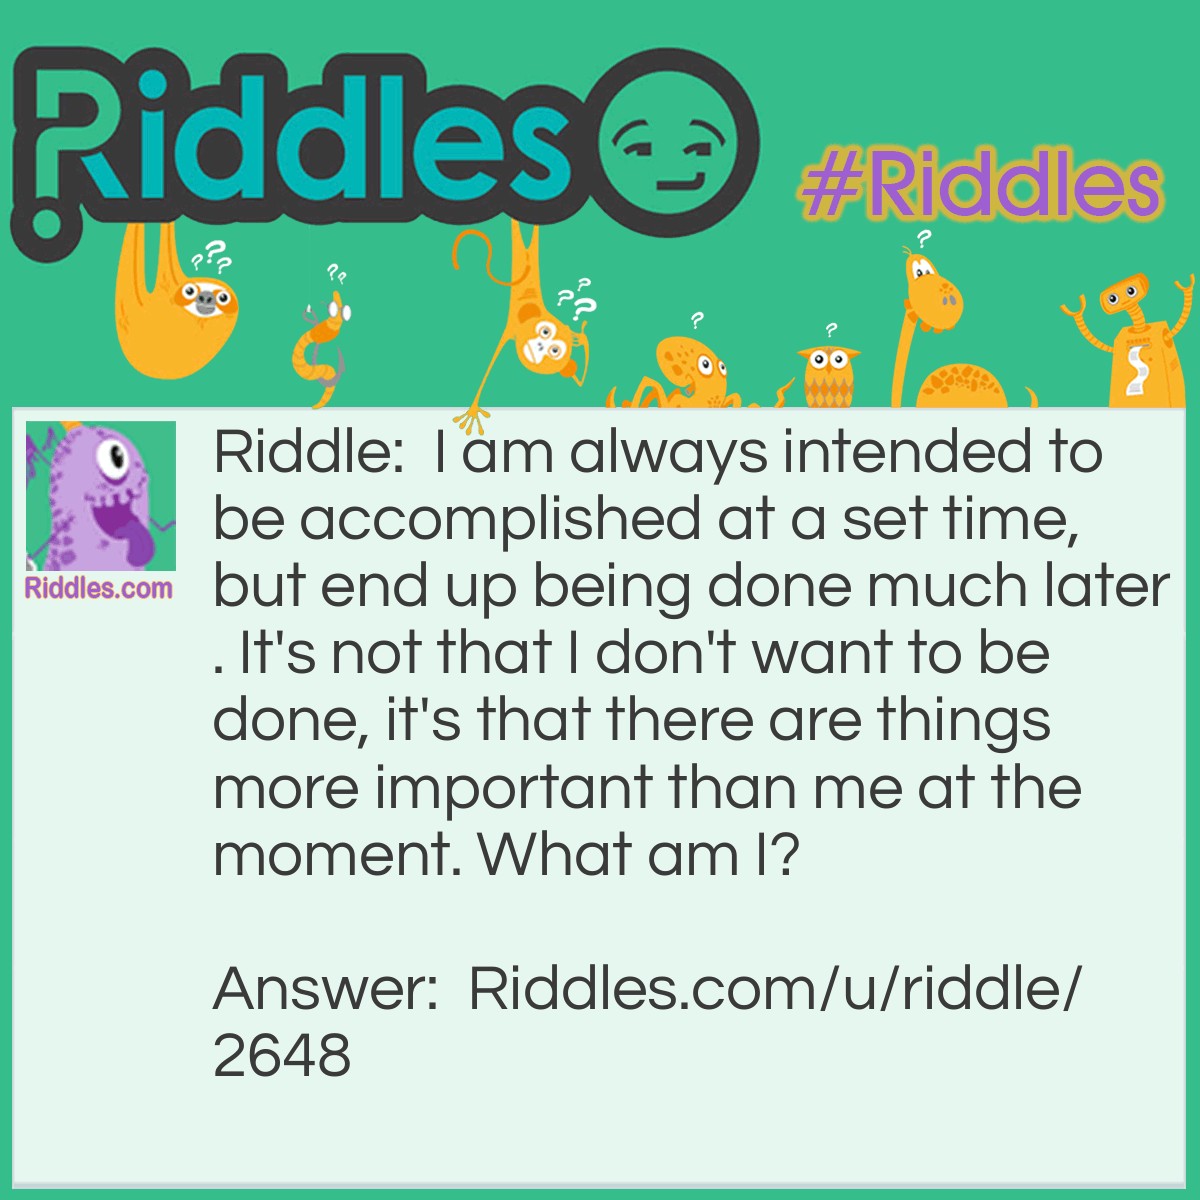 Riddle: I am always intended to be accomplished at a set time, but end up being done much later. It's not that I don't want to be done, it's that there are things more important than me at the moment. What am I? Answer: A procrastinator's plan.